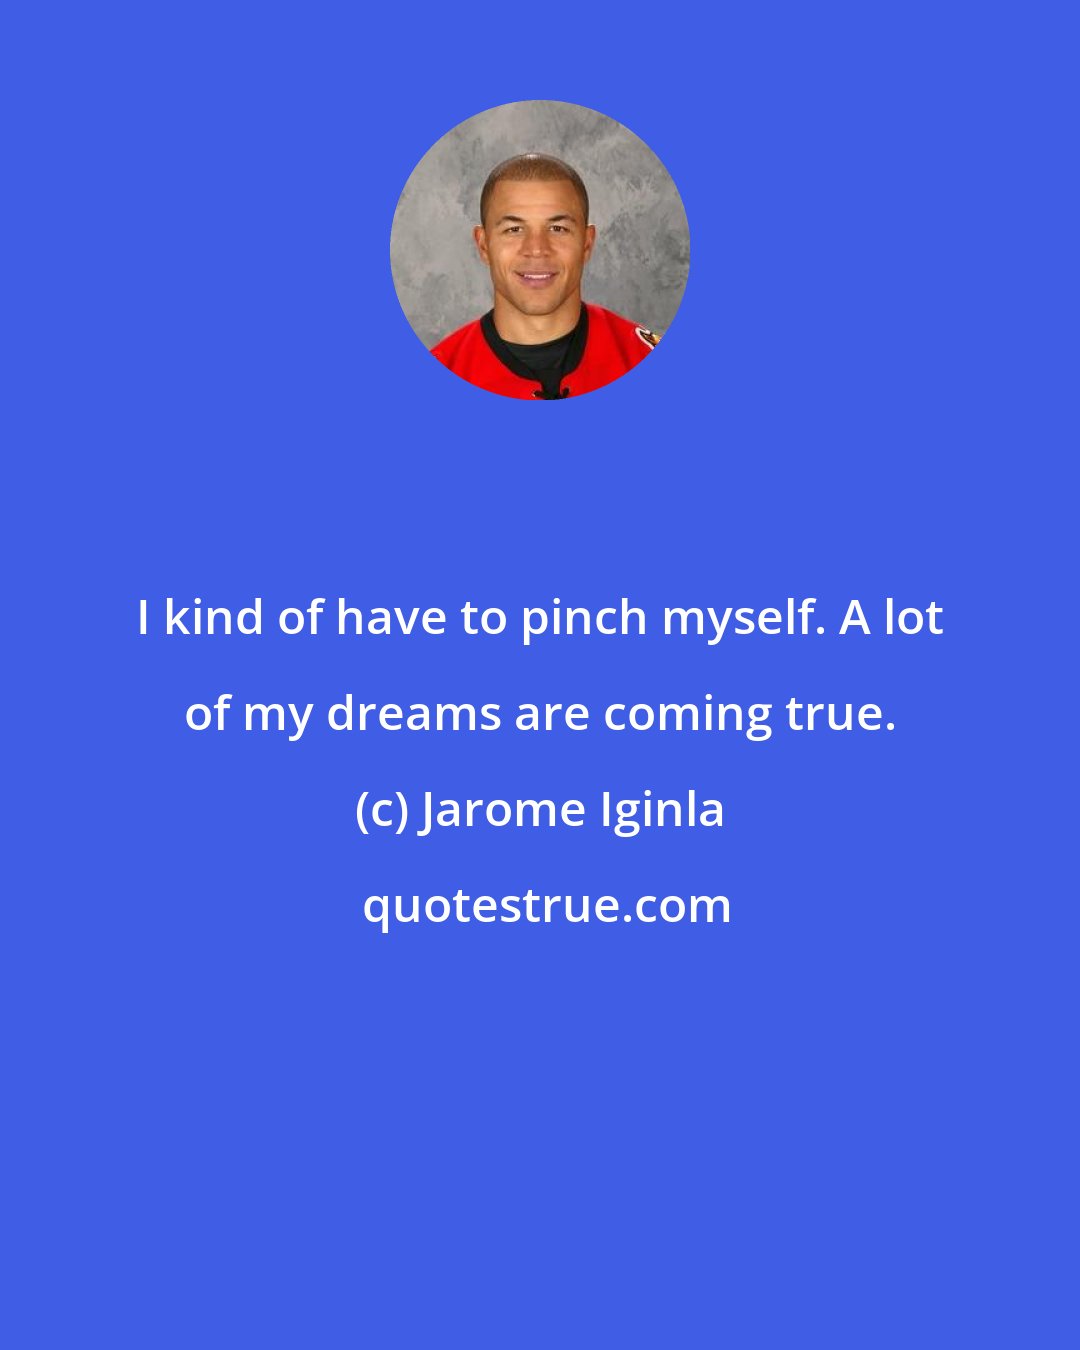 Jarome Iginla: I kind of have to pinch myself. A lot of my dreams are coming true.